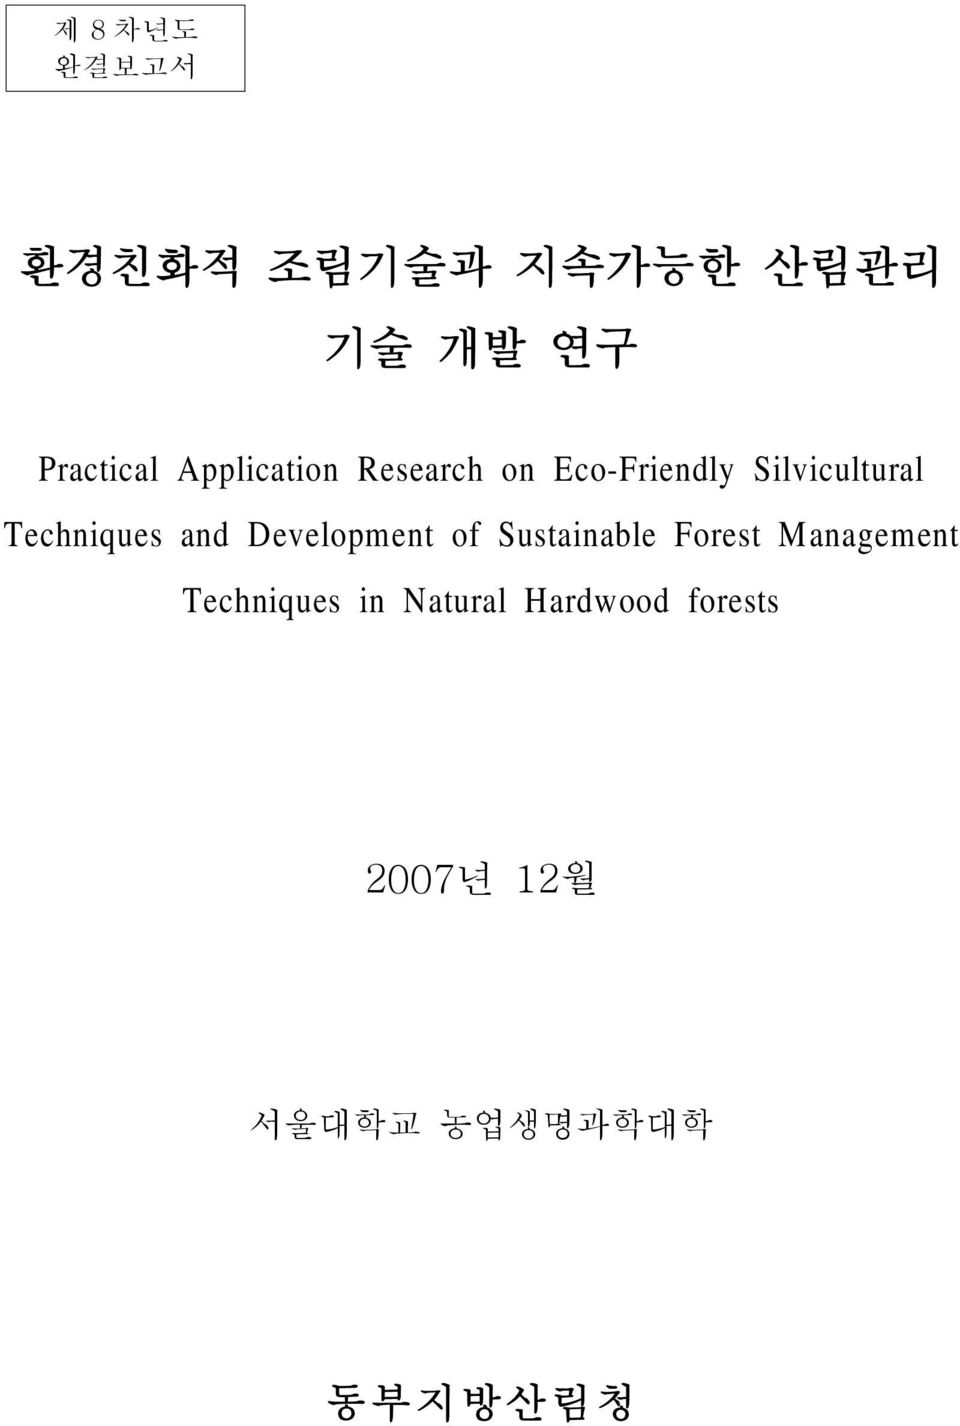 Techniques and Development of Sustainable Forest Management